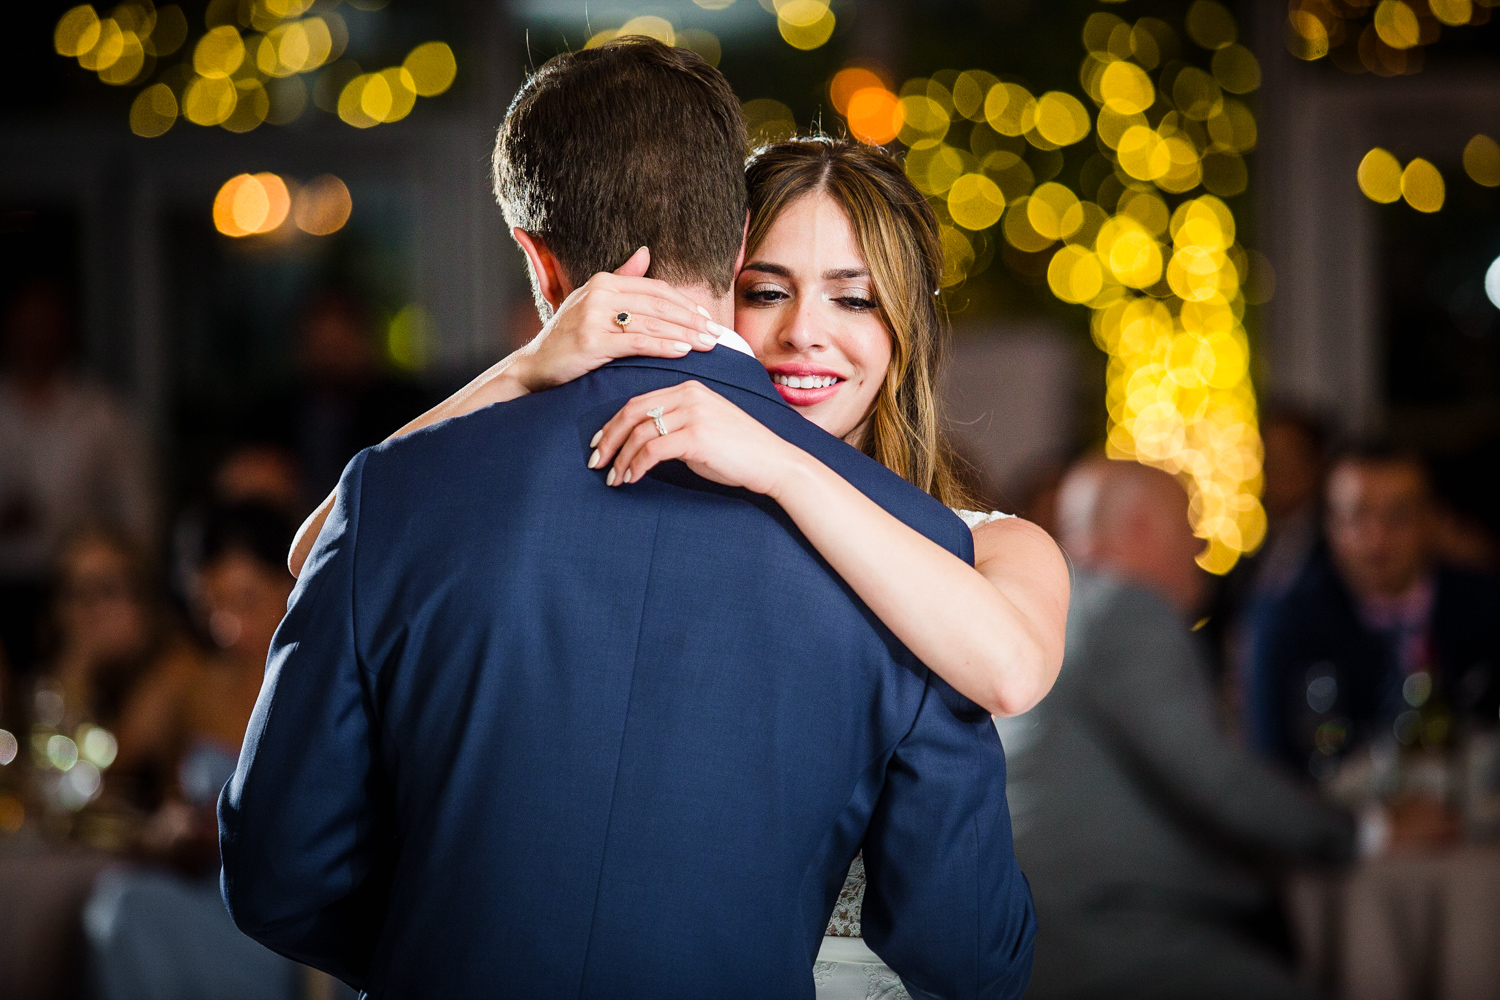 A bride and groom share their first dance during a Gallery Marchetti wedding.